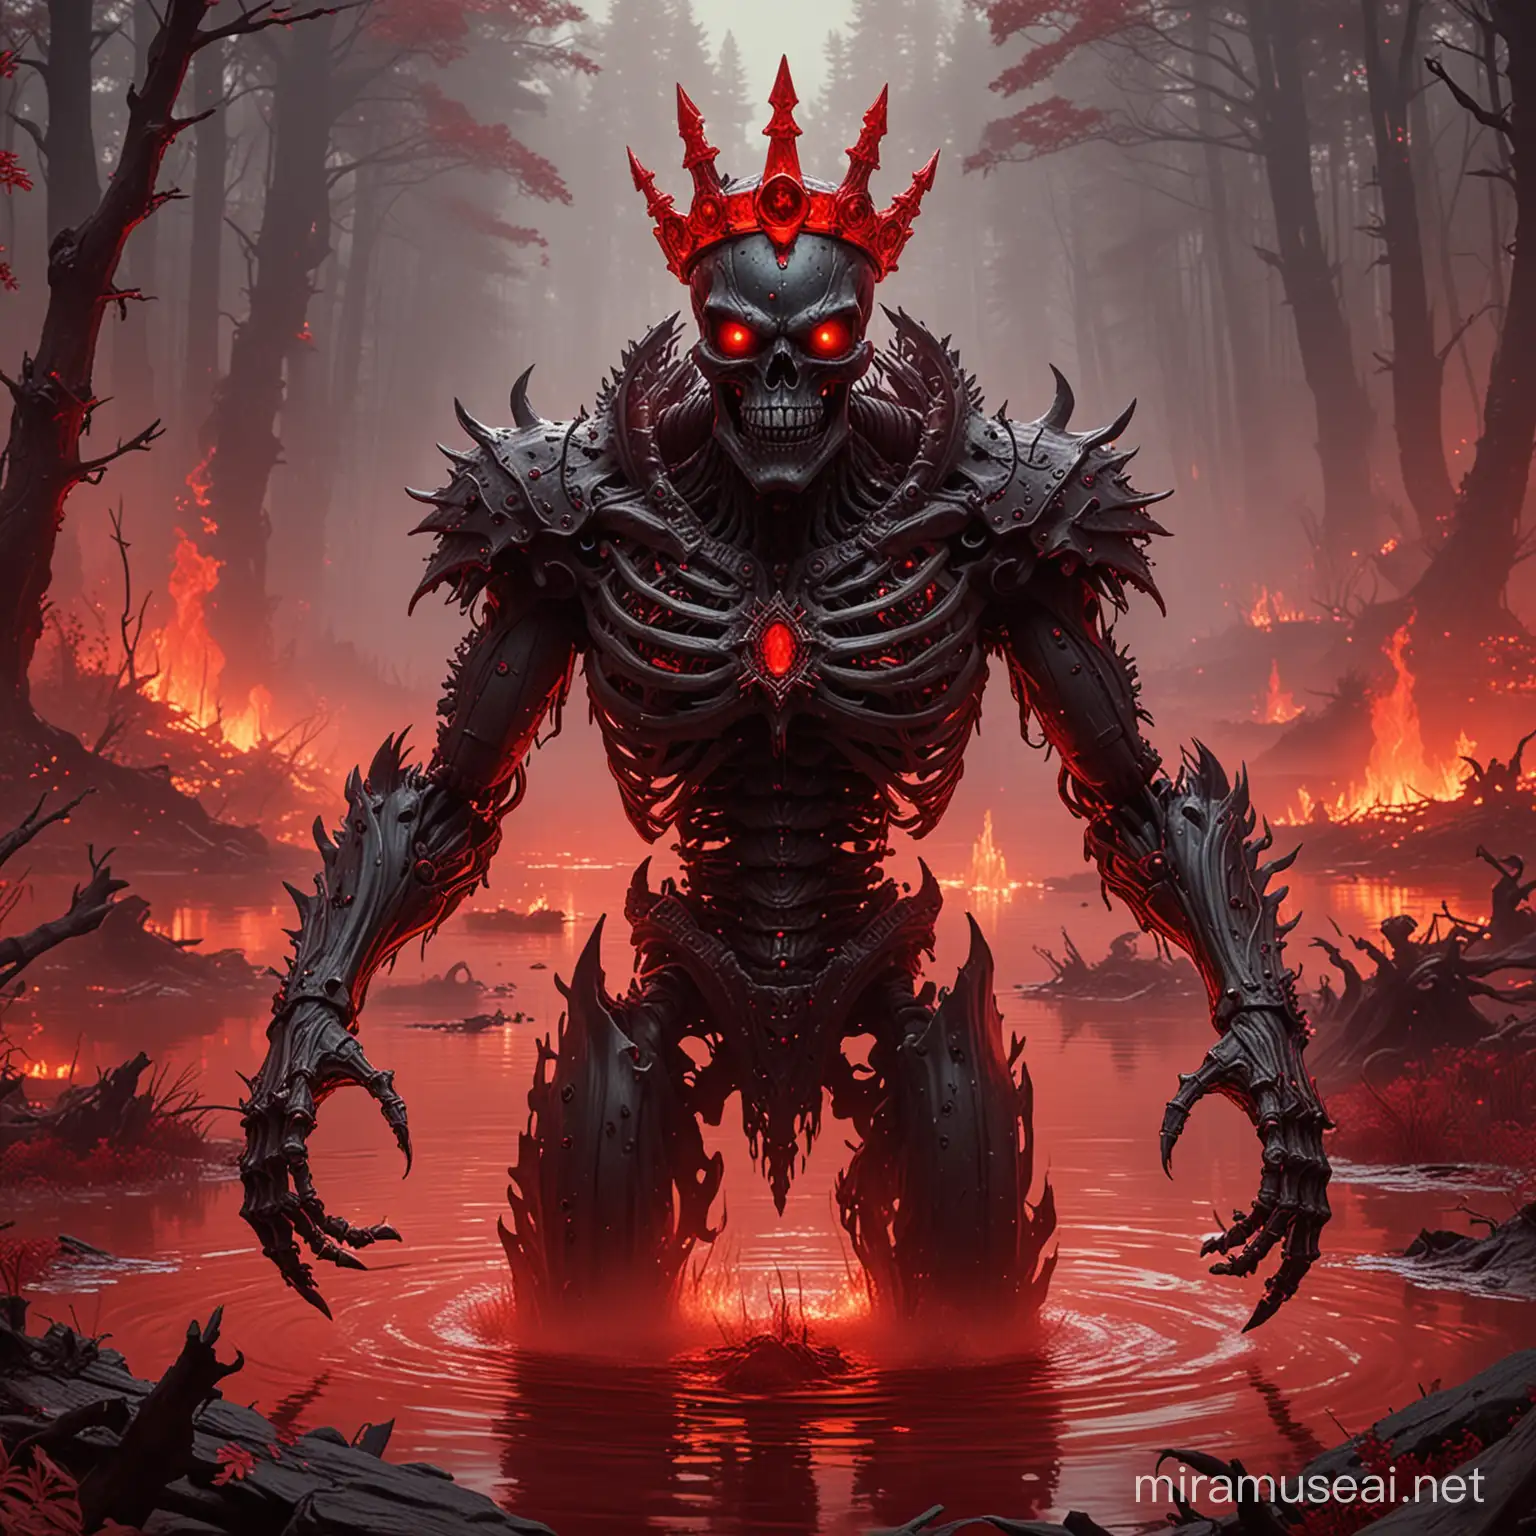 A Kaiju-sized scarlet skeleton with a demonic-looking maroon crown with a red eye jewel in the center standing in a blood-red lake, surrounded by a forest fire.